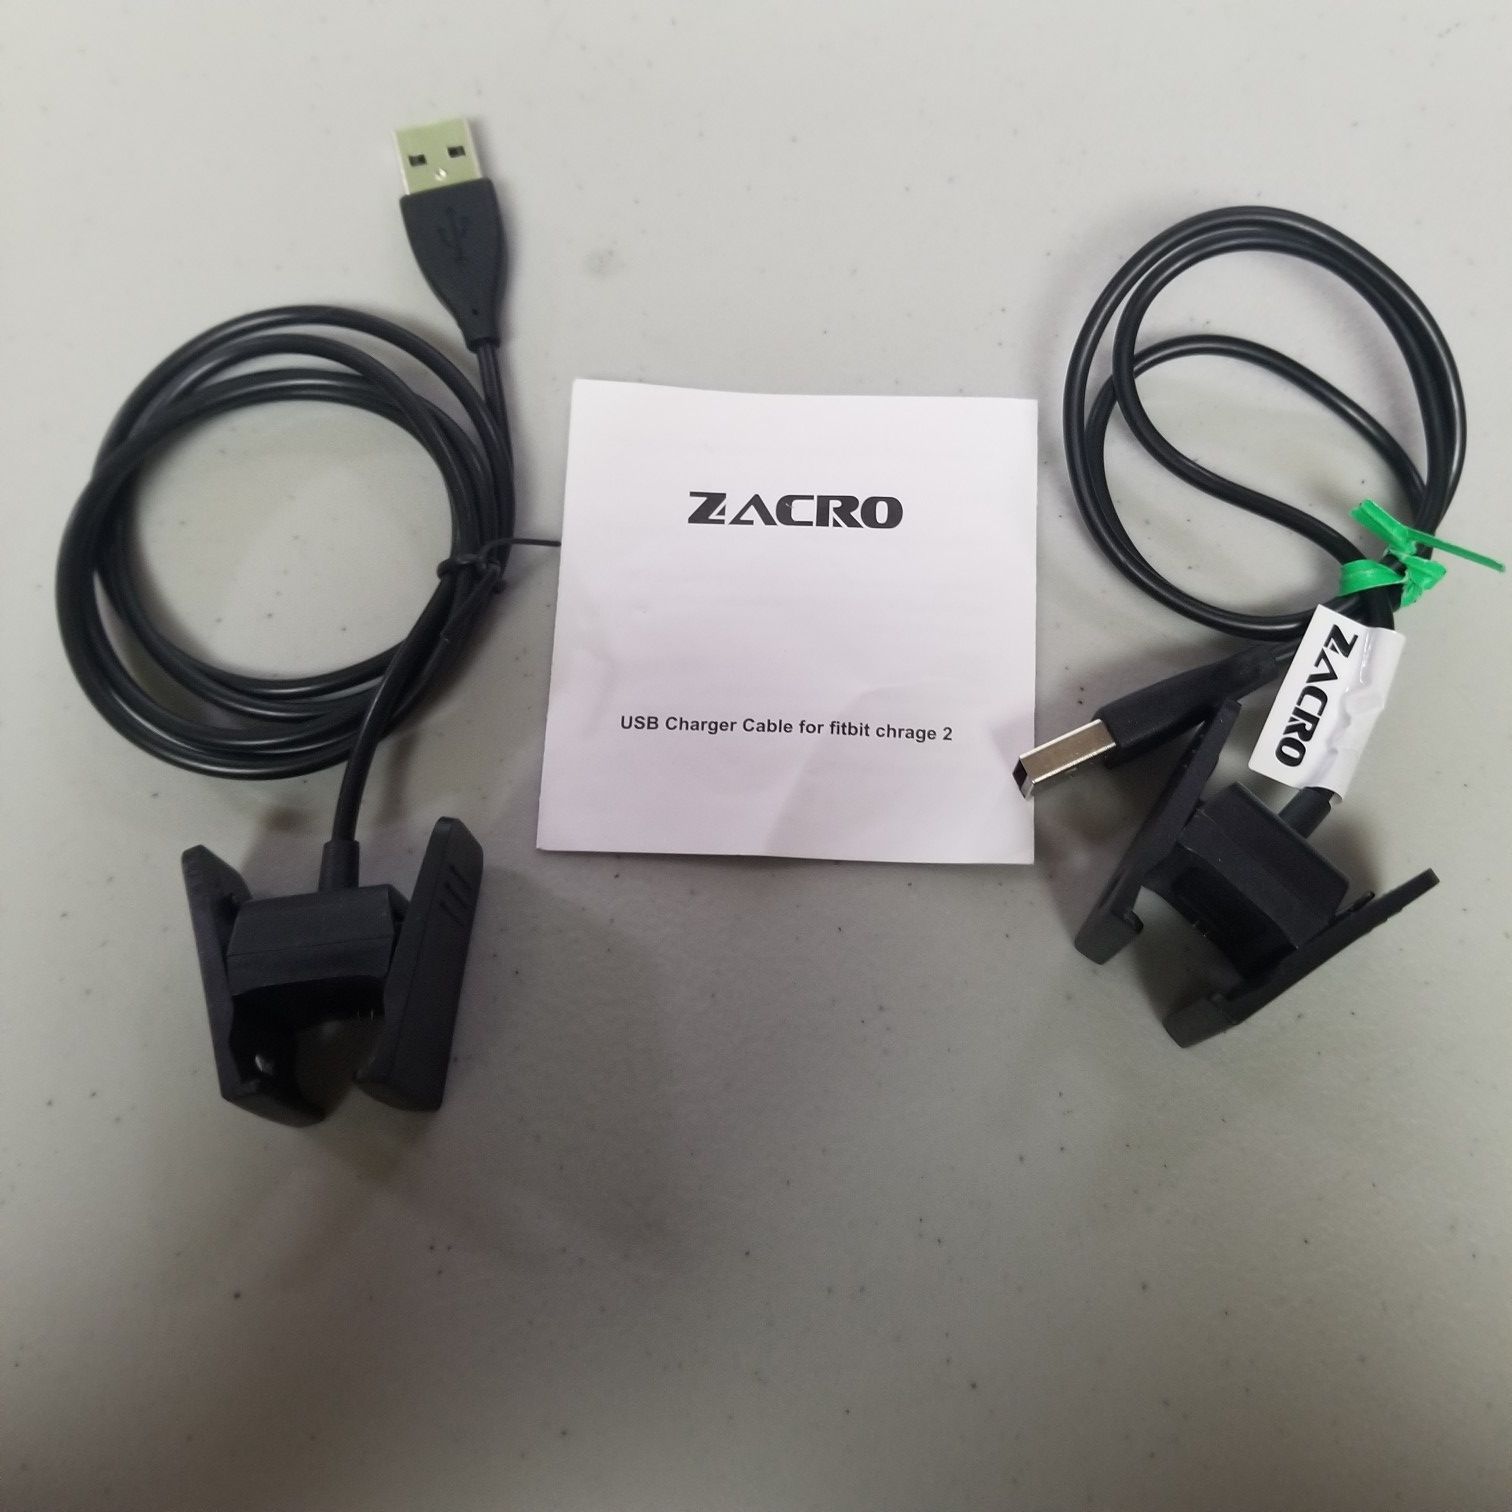 Zacro Fitbit Charge 2 USB Charger 2Pcs Replacement New Open Box